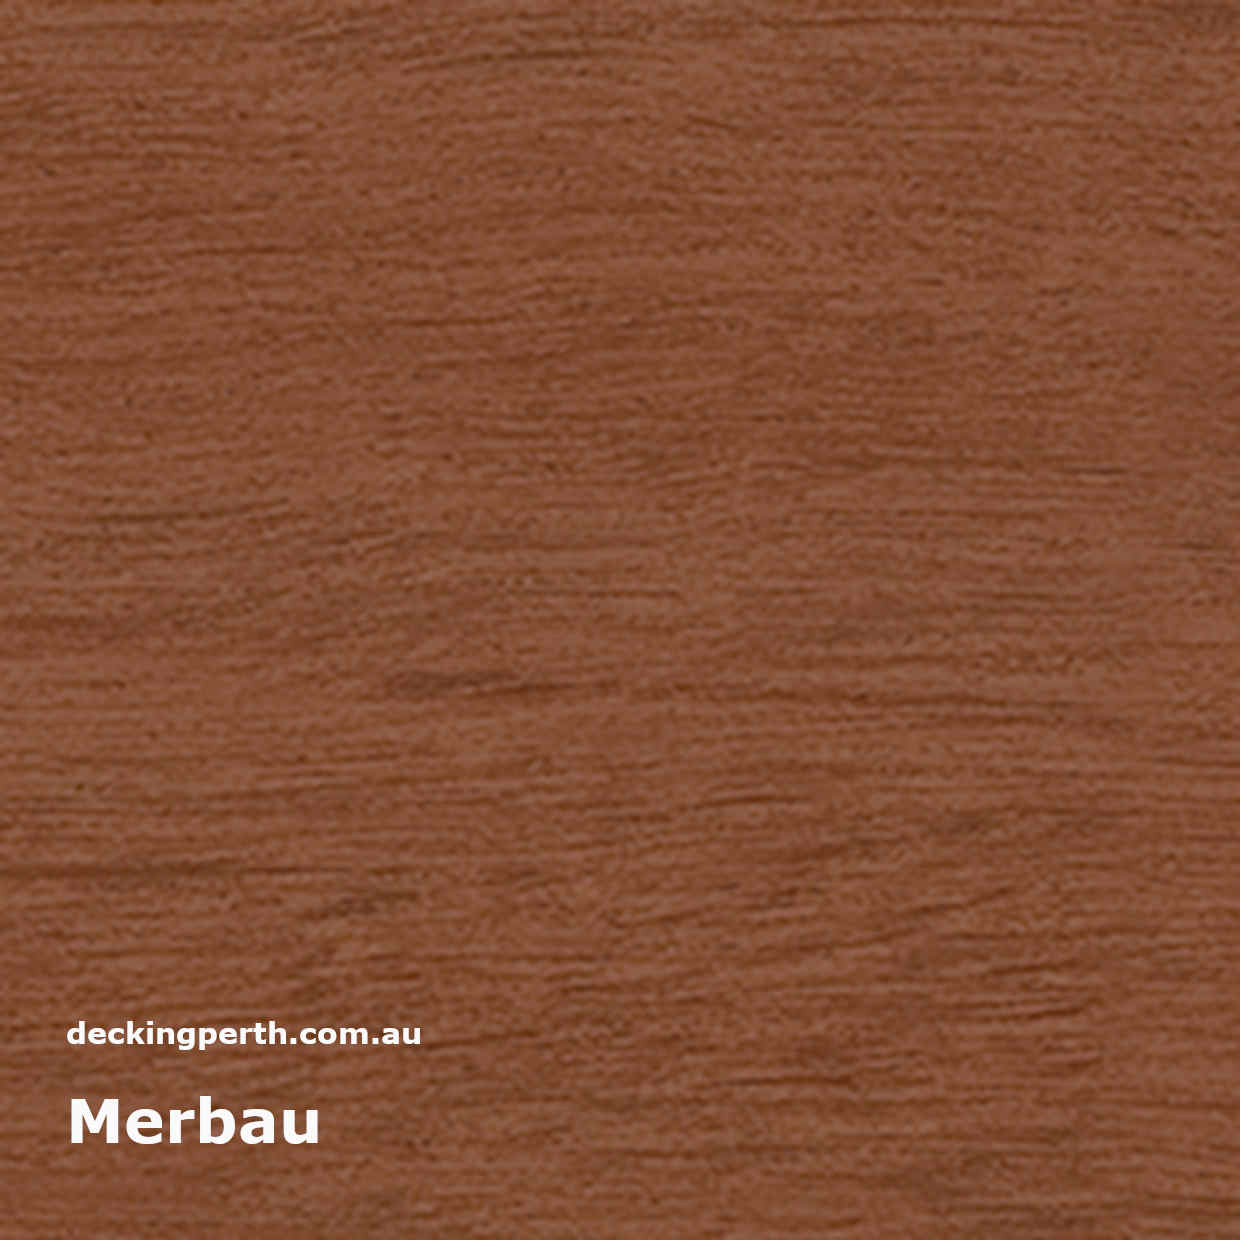  Analyzing image    Cabots_Deck___Exterior_Stain_Oil_Based_Merbau_Decking_Perth